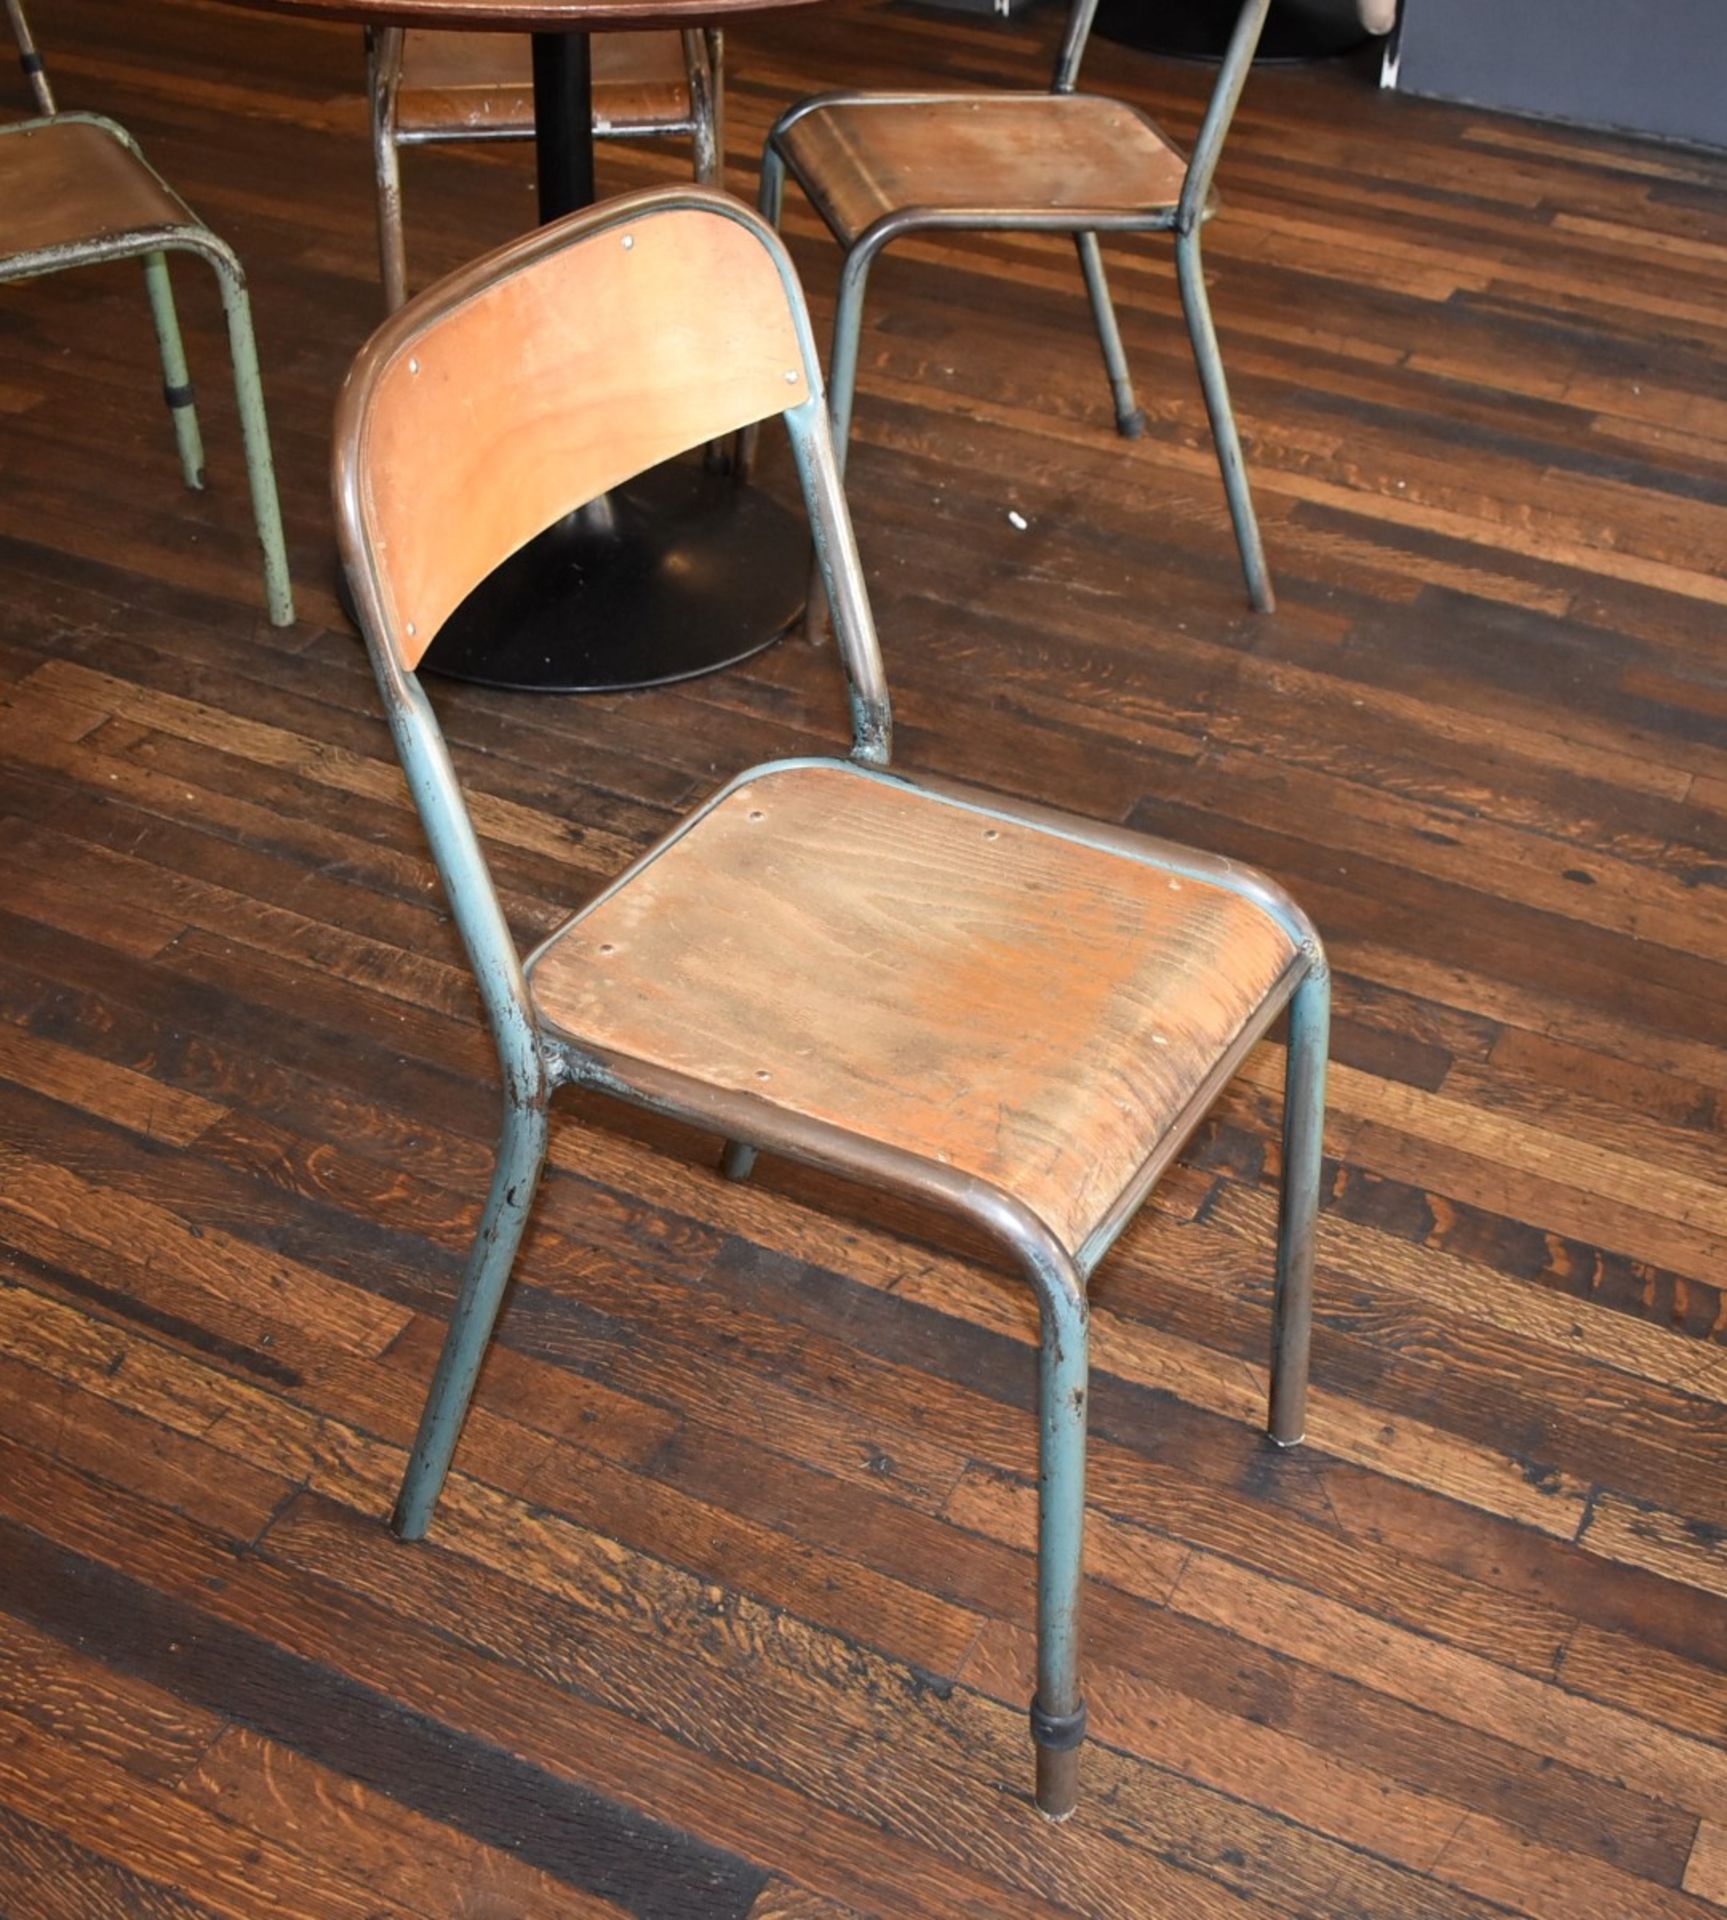 8 x Vintage Stackable School Chairs With Tubular Bent Steel Frames and Curved Plywood Seats - Image 4 of 8